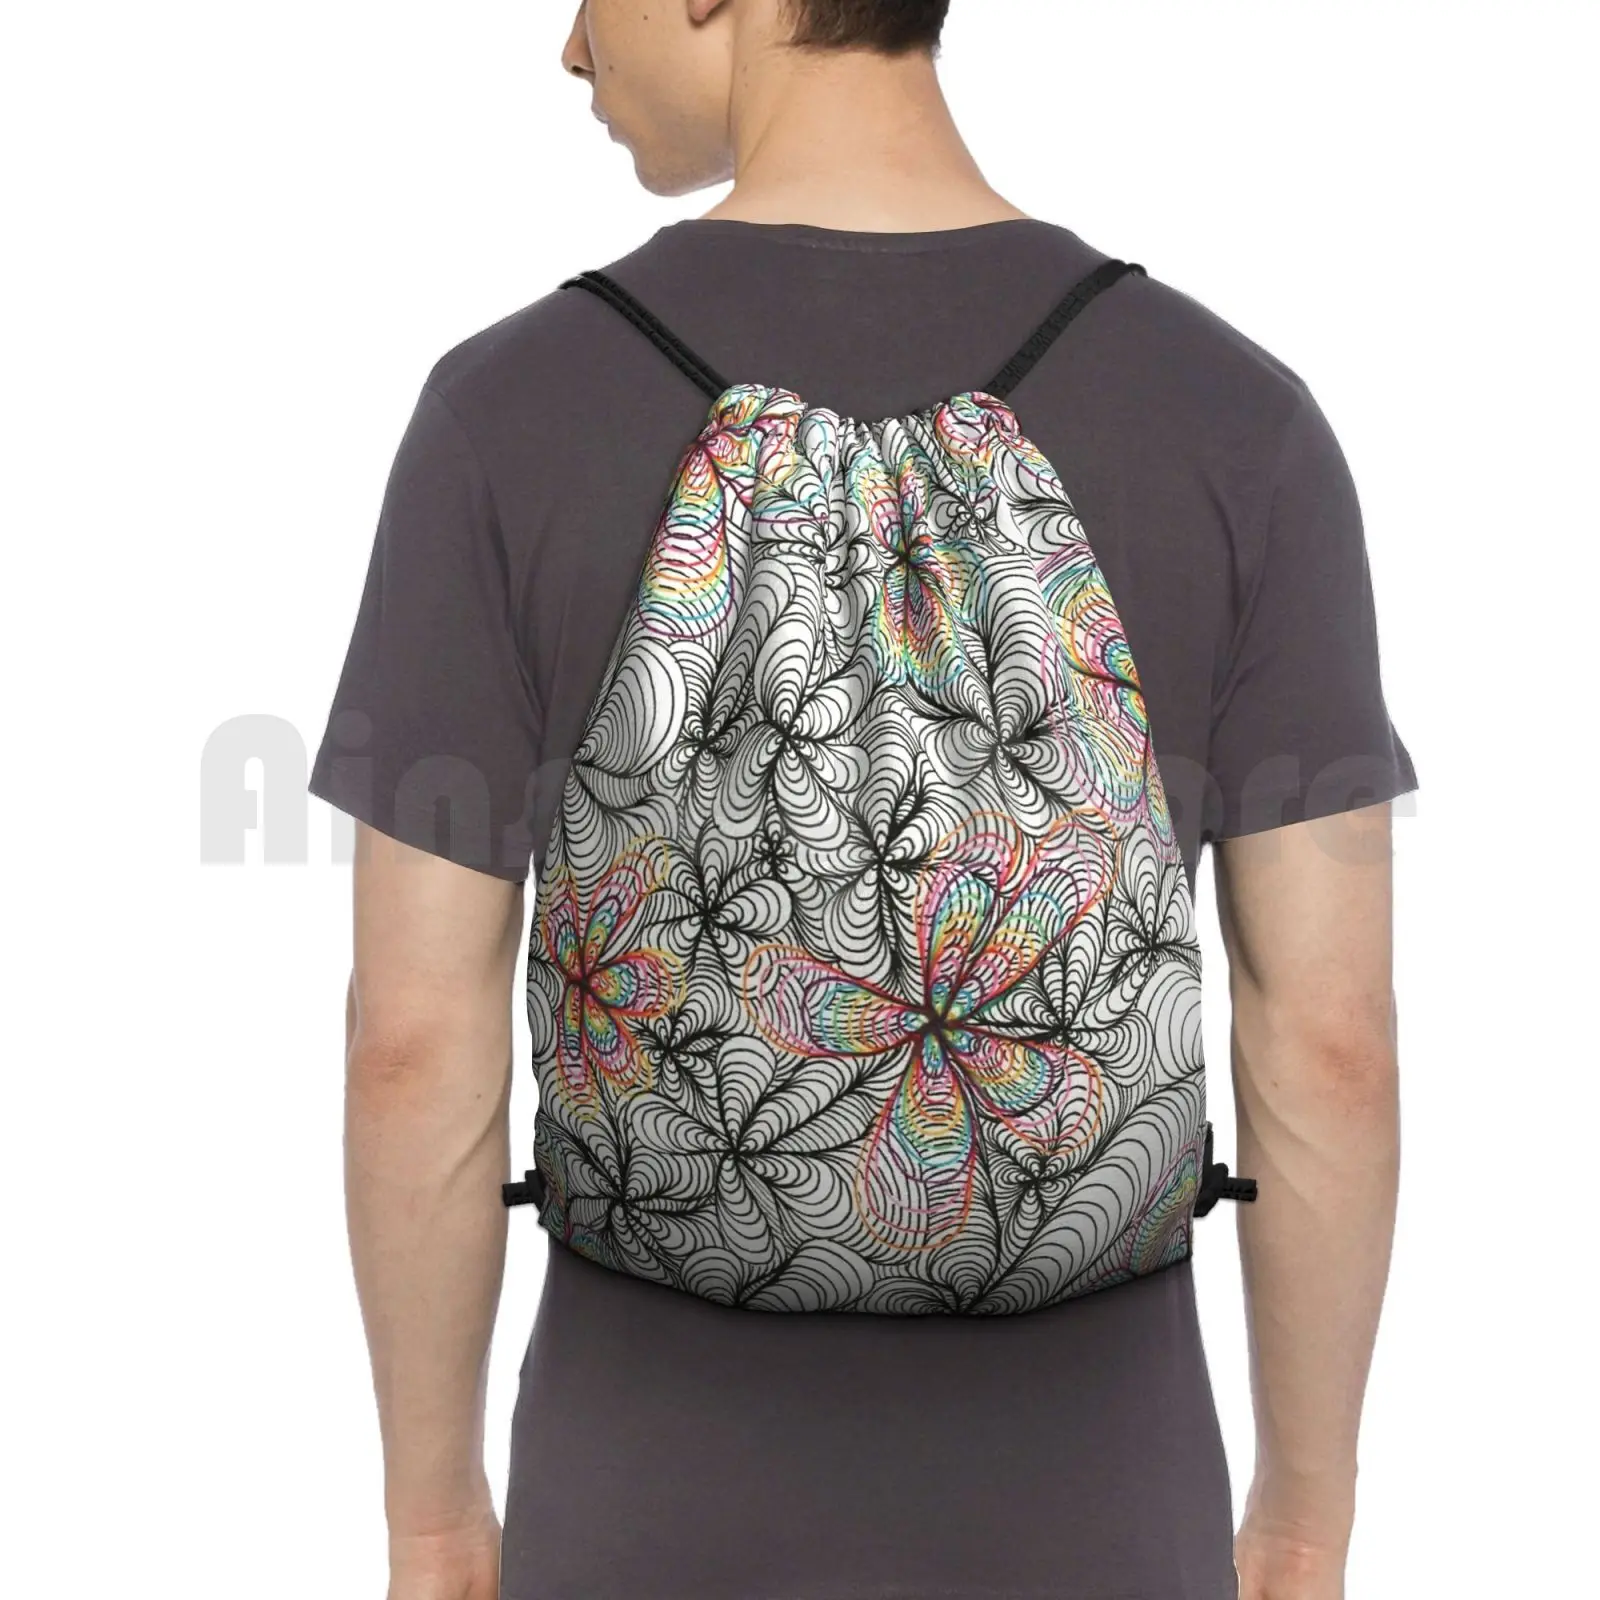 

Abstract Flowers Backpack Drawstring Bags Gym Bag Waterproof Trippy Hipster Band Neon Abstract Hand Drawn Rainbow Red